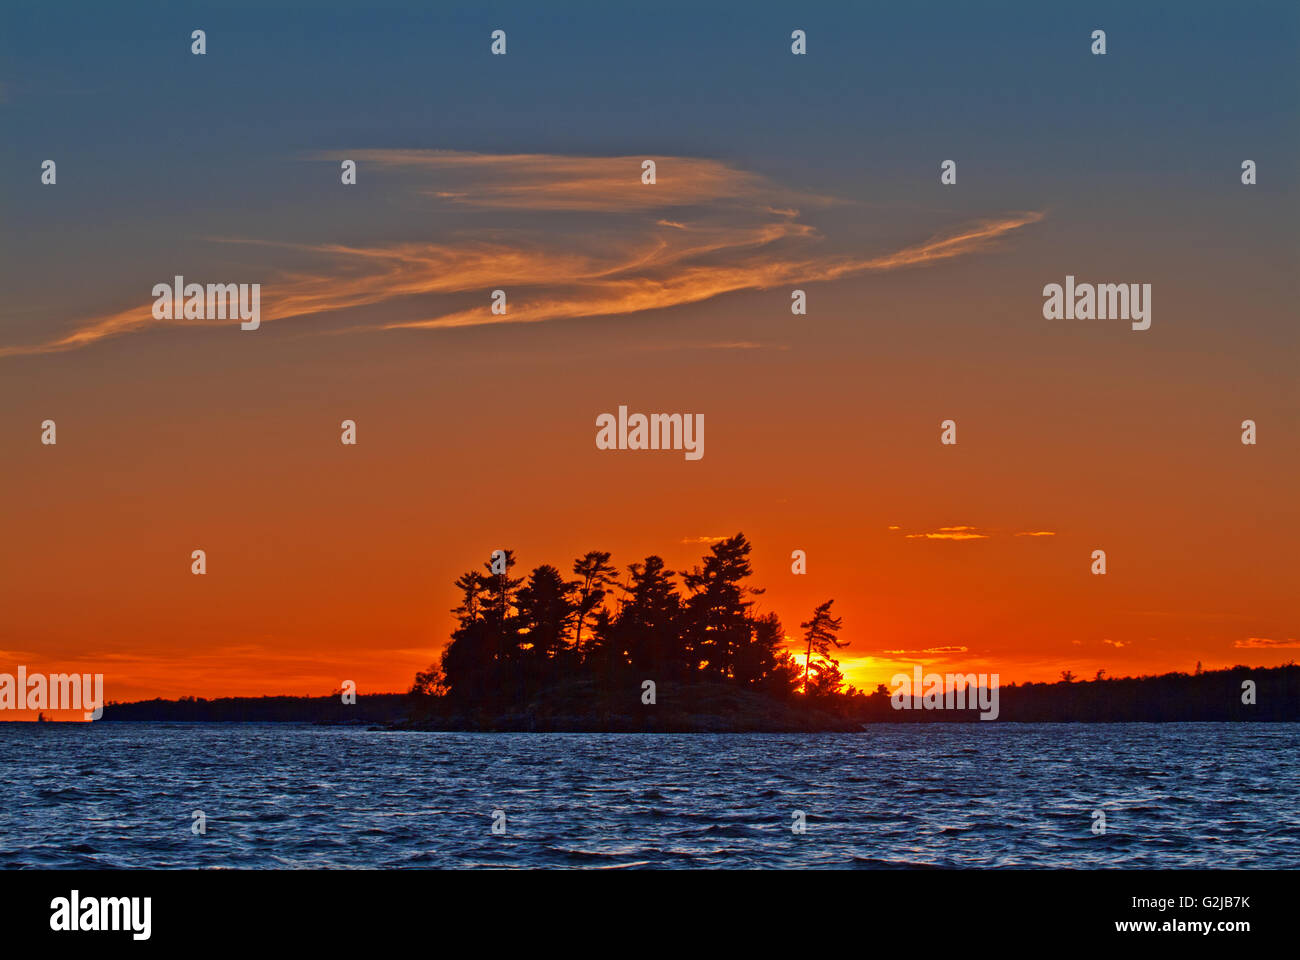 Island on Lake of the Woods at sunset, Morson, Ontario, Canada Stock Photo